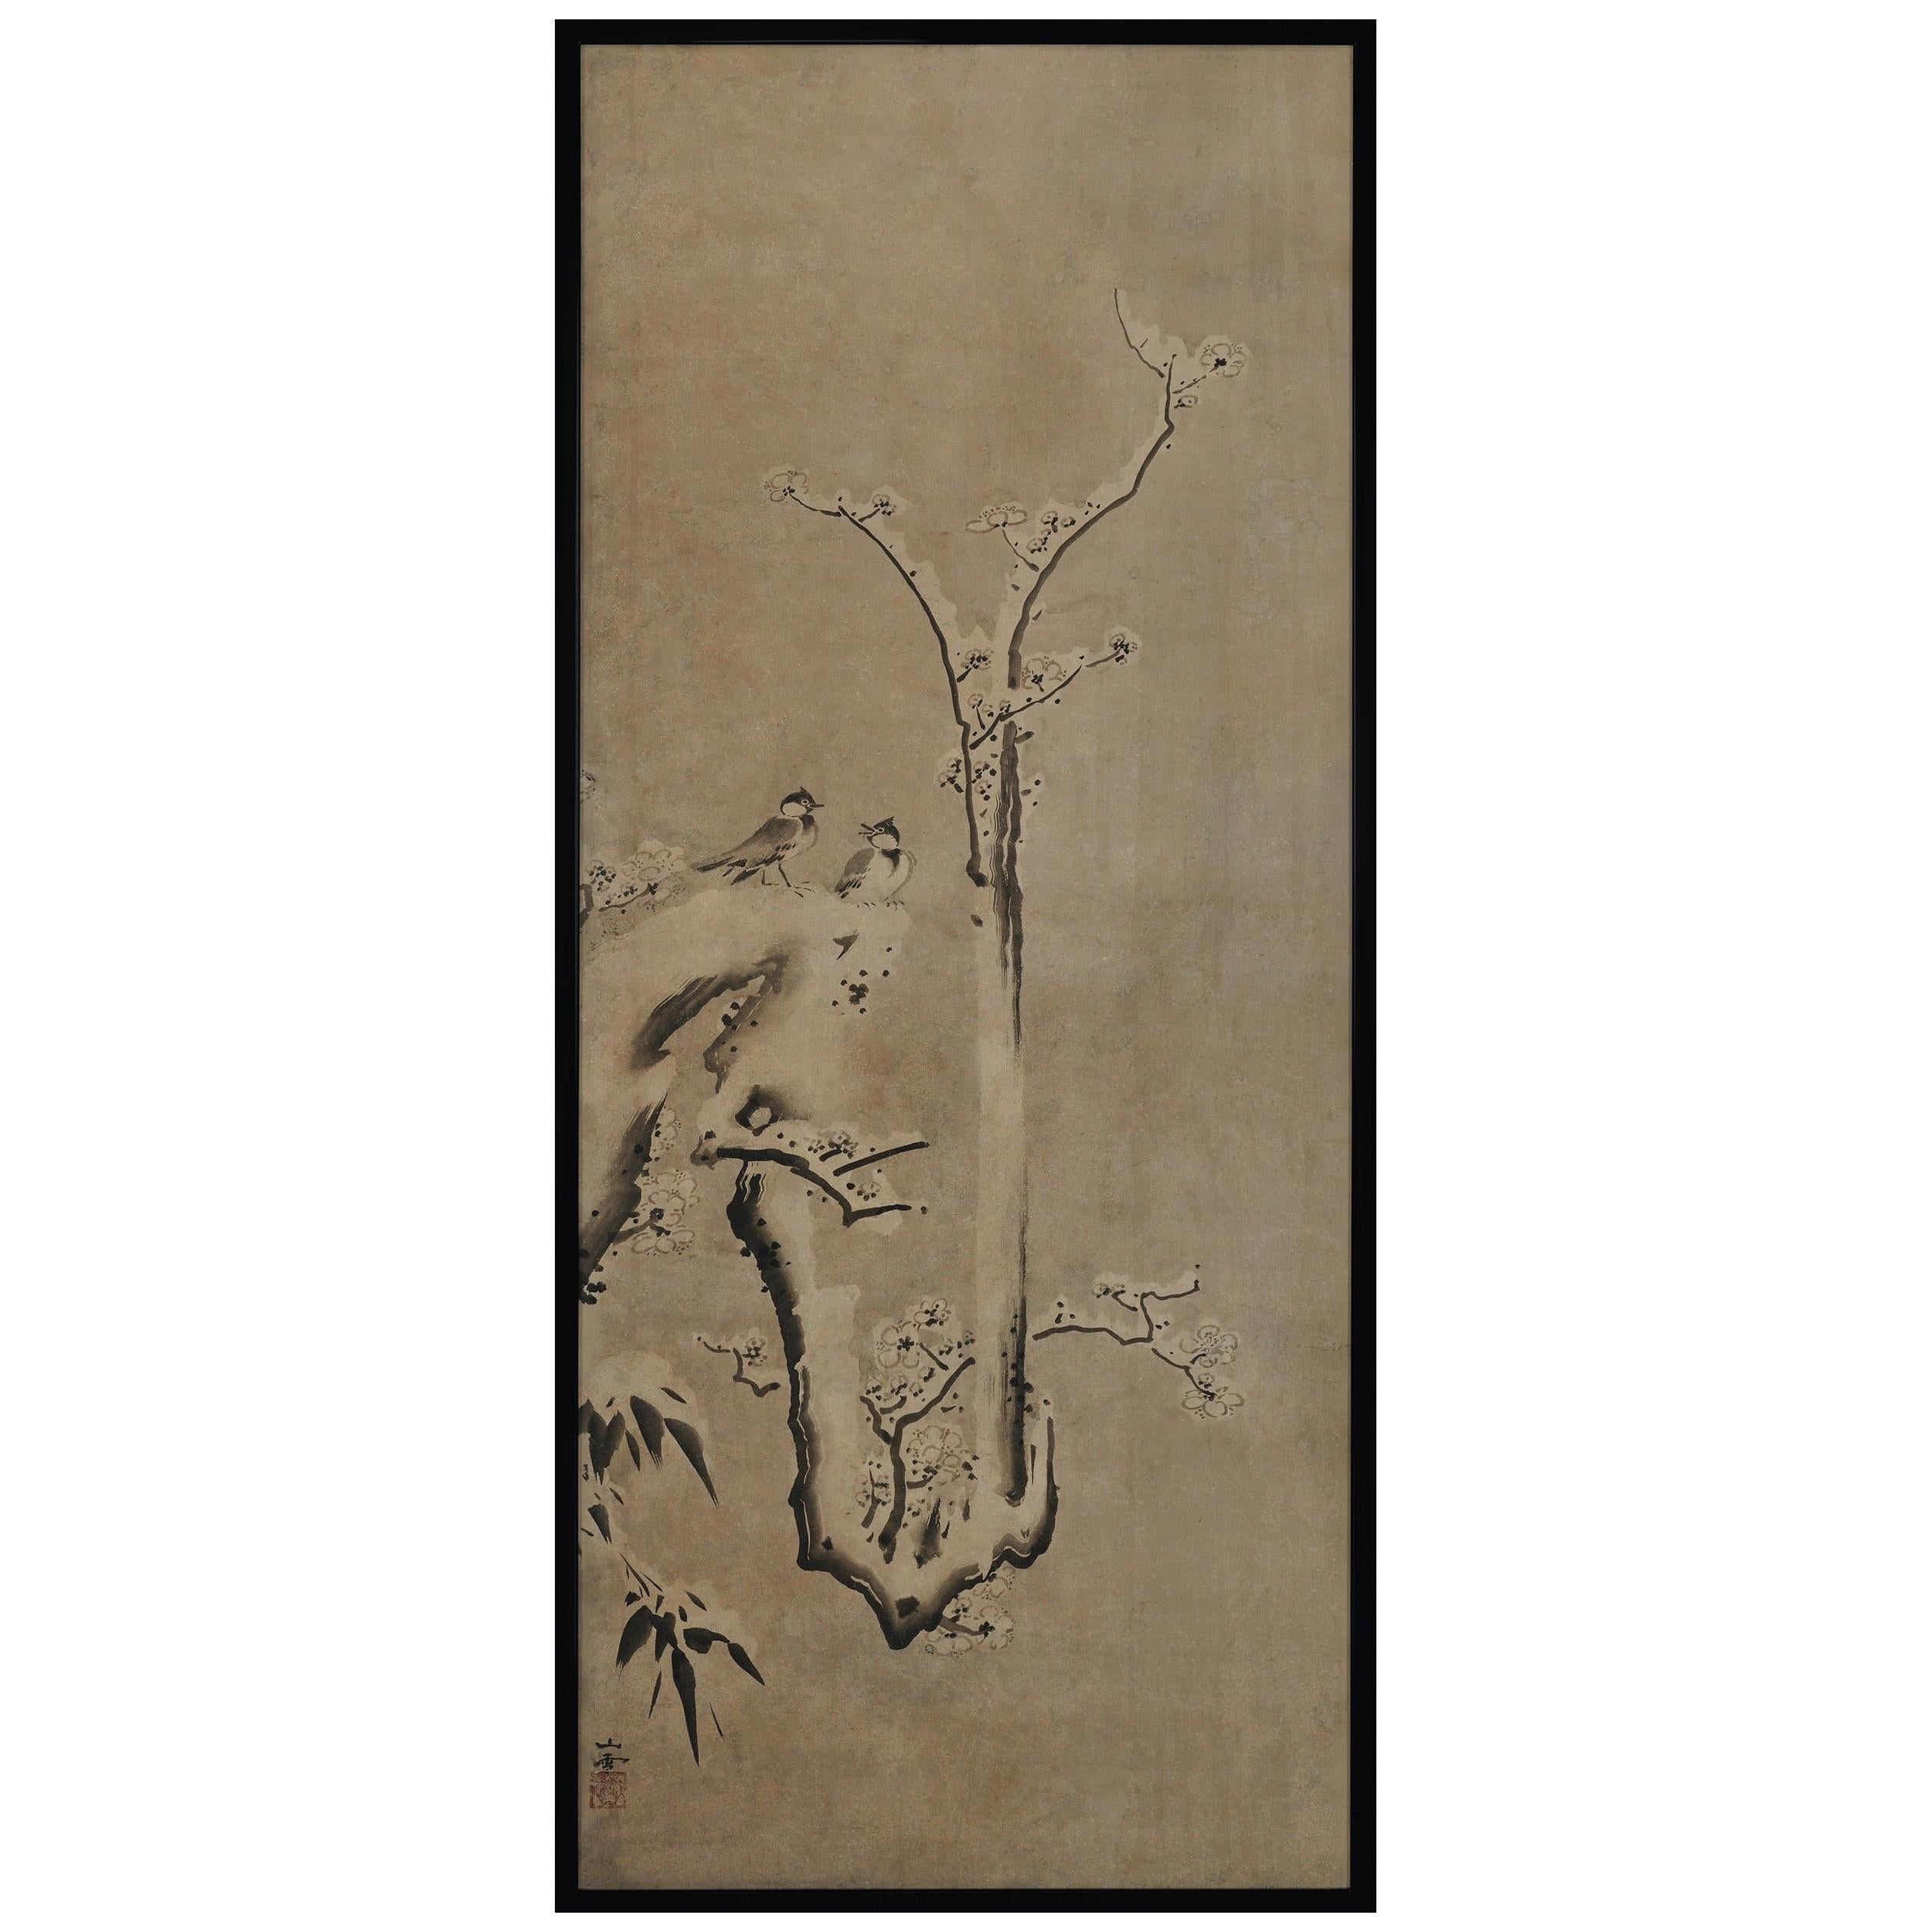 17th Century Japanese Framed Painting by Kano Sansetsu, Plum Blossoms in Snow